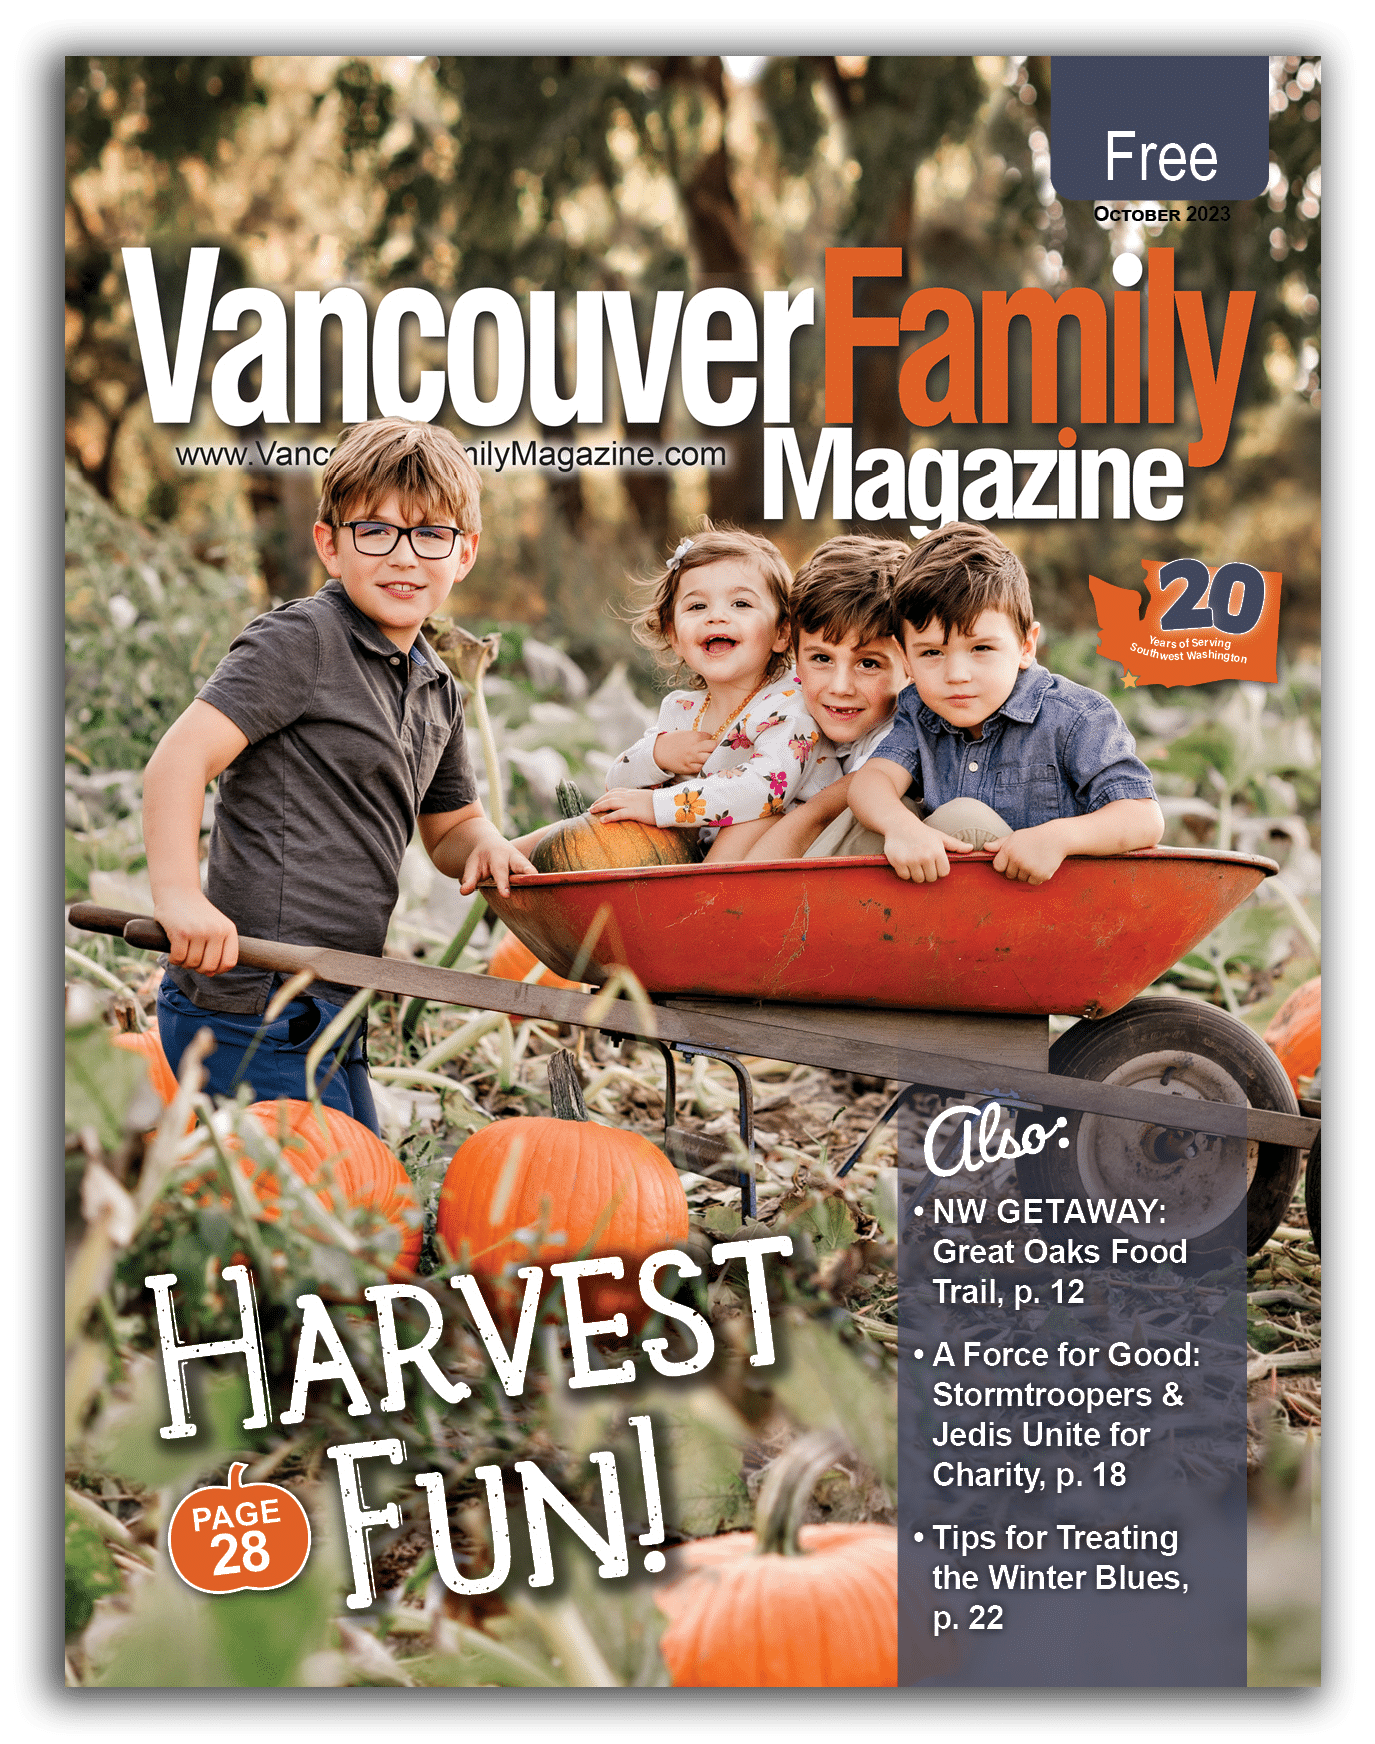 Vancouver Family Magazine's October 2023 issue cover features an older kid pushing 3 younger kids in a wheelbarrow through a pumpkin patch